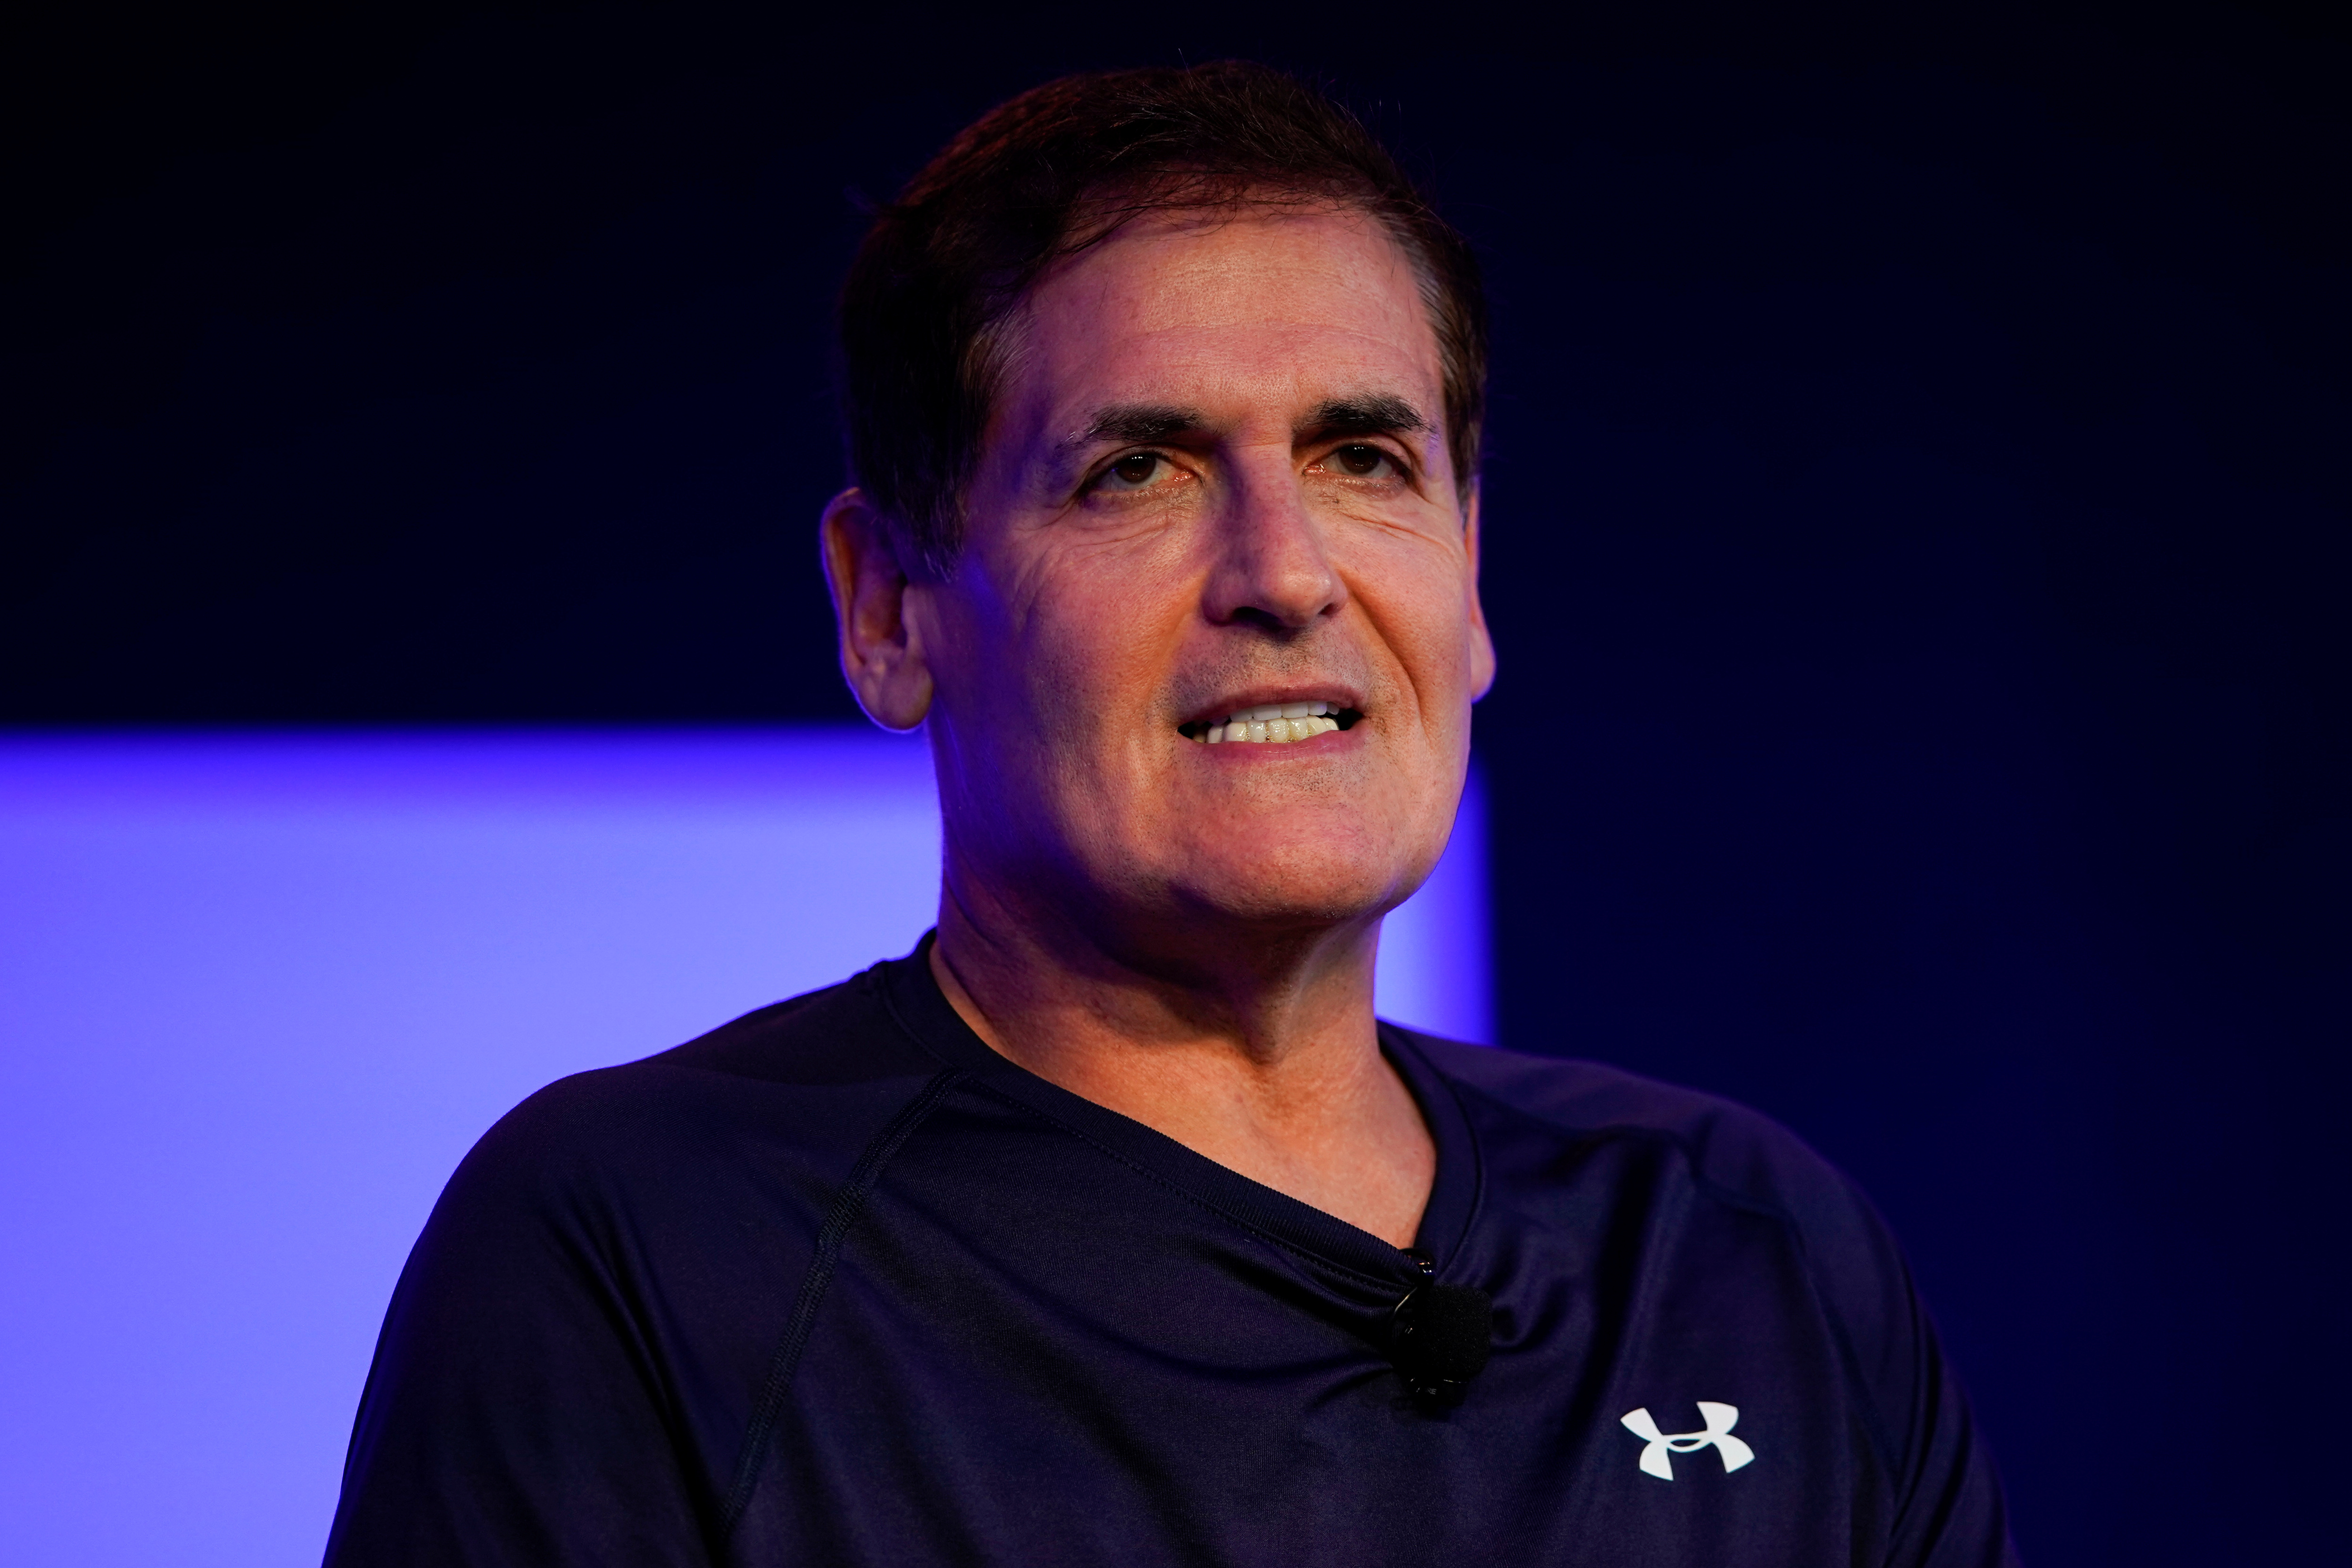 Mark Cuban, entrepreneur and owner of the Dallas Mavericks, speaks at the WSJTECH live conference in Laguna Beach, California